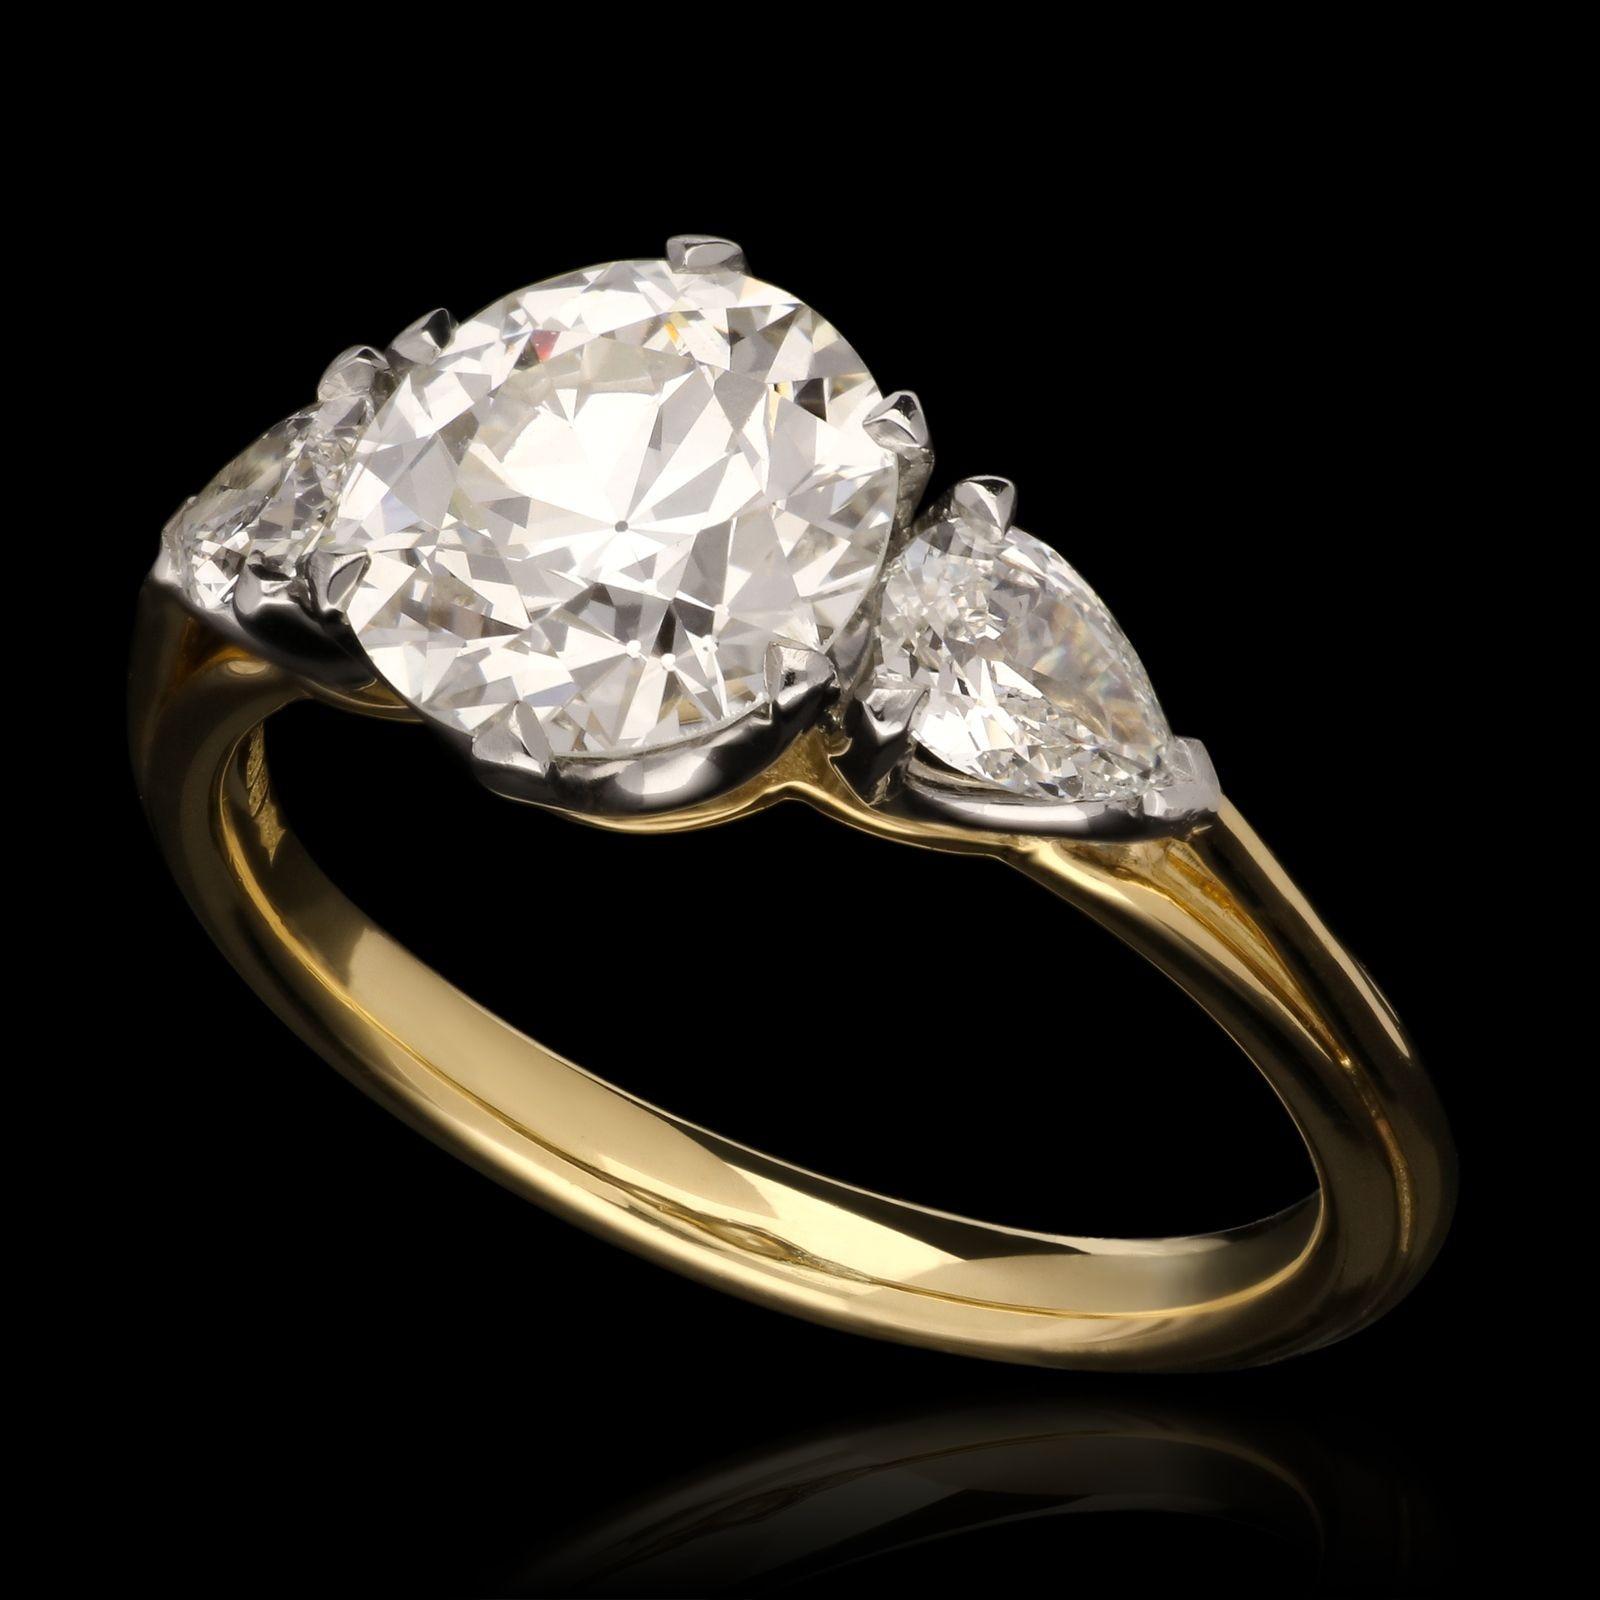 A beautiful old European brilliant cut diamond weighing 1.92cts claw set in 18ct yellow gold and platinum with open scooped gallery between shoulders set with old cut pear shaped diamonds in platinum claw settings, all to a finely hand crafted gold